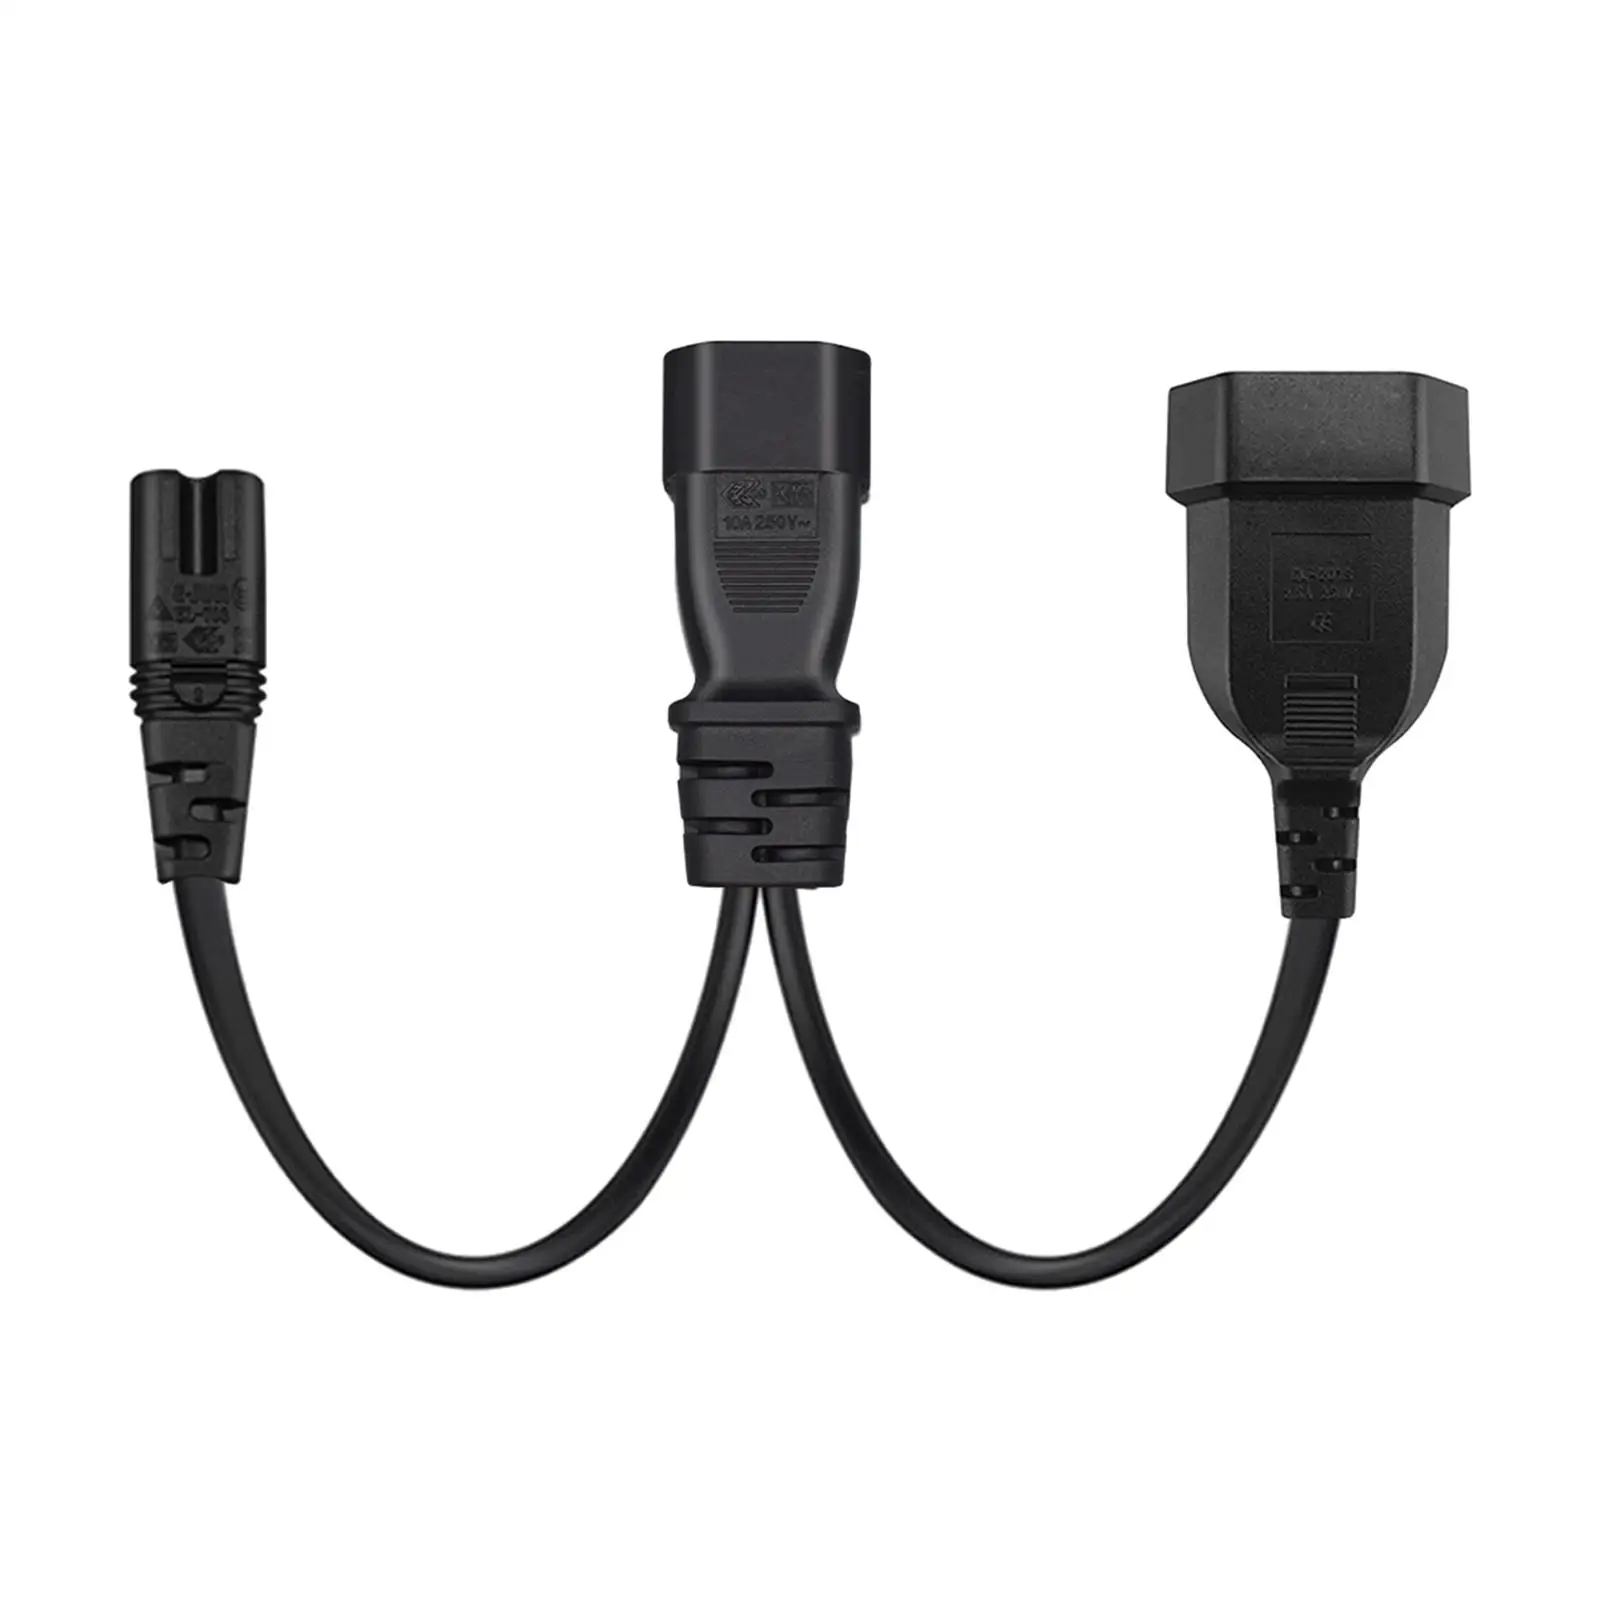 IEC 320 C14 Male to C7+European Female Y Splitter Power Cord Power Cable C14 to C7+EU Replacement Power Line 1 0.32M